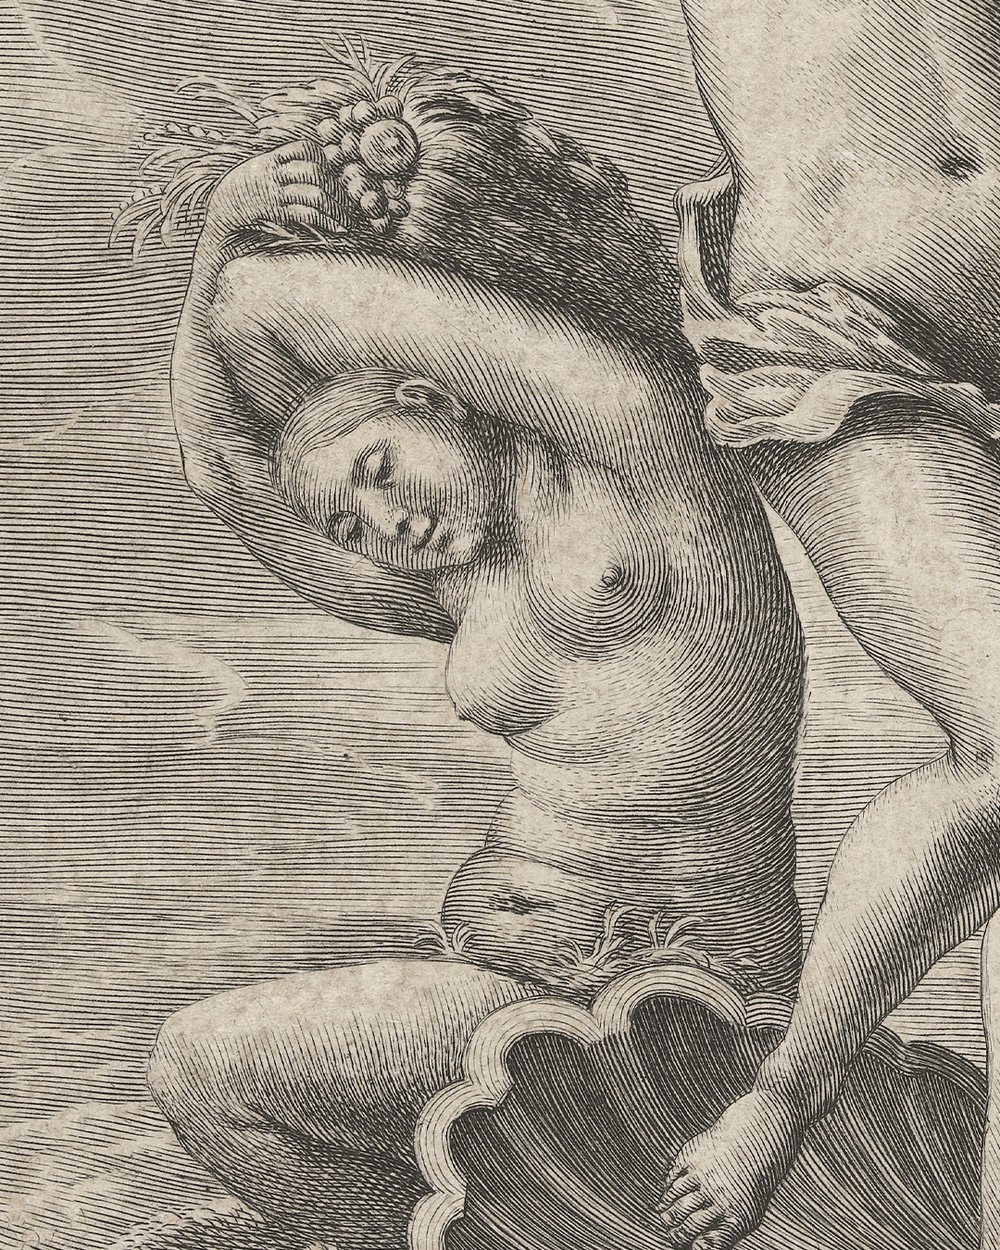 "Venus carried by the wind on her shell at sea" (1590 - 1633)